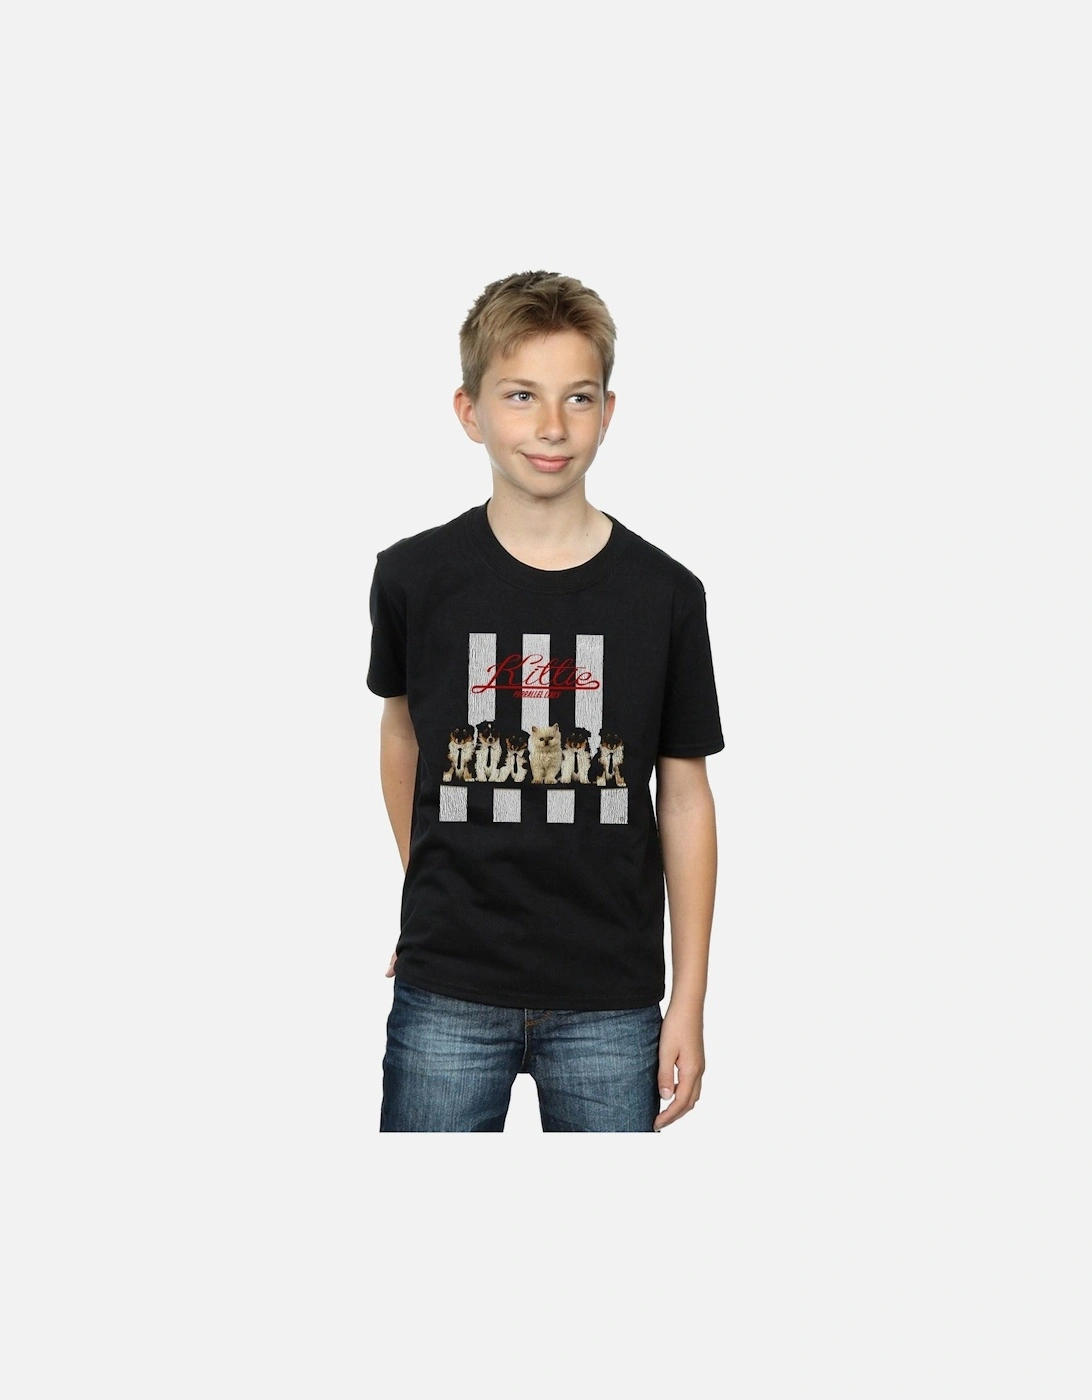 Boys Kitty Purrallel Lines T-Shirt